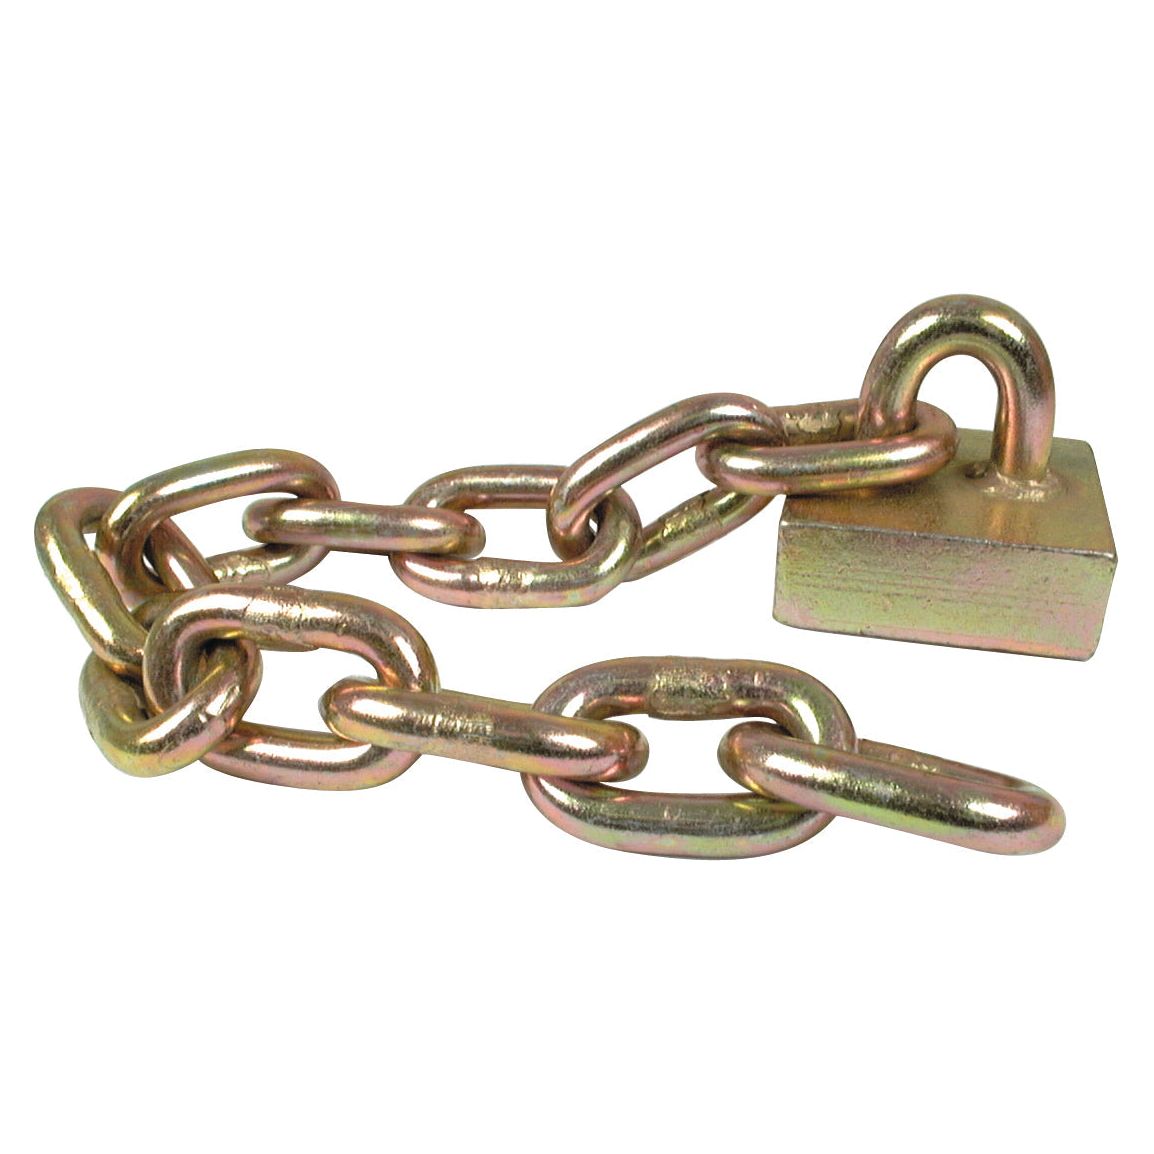 Flail Chain Assembly 1/2" x 11 Link Replacement for Marshall - S.78869 - Massey Tractor Parts